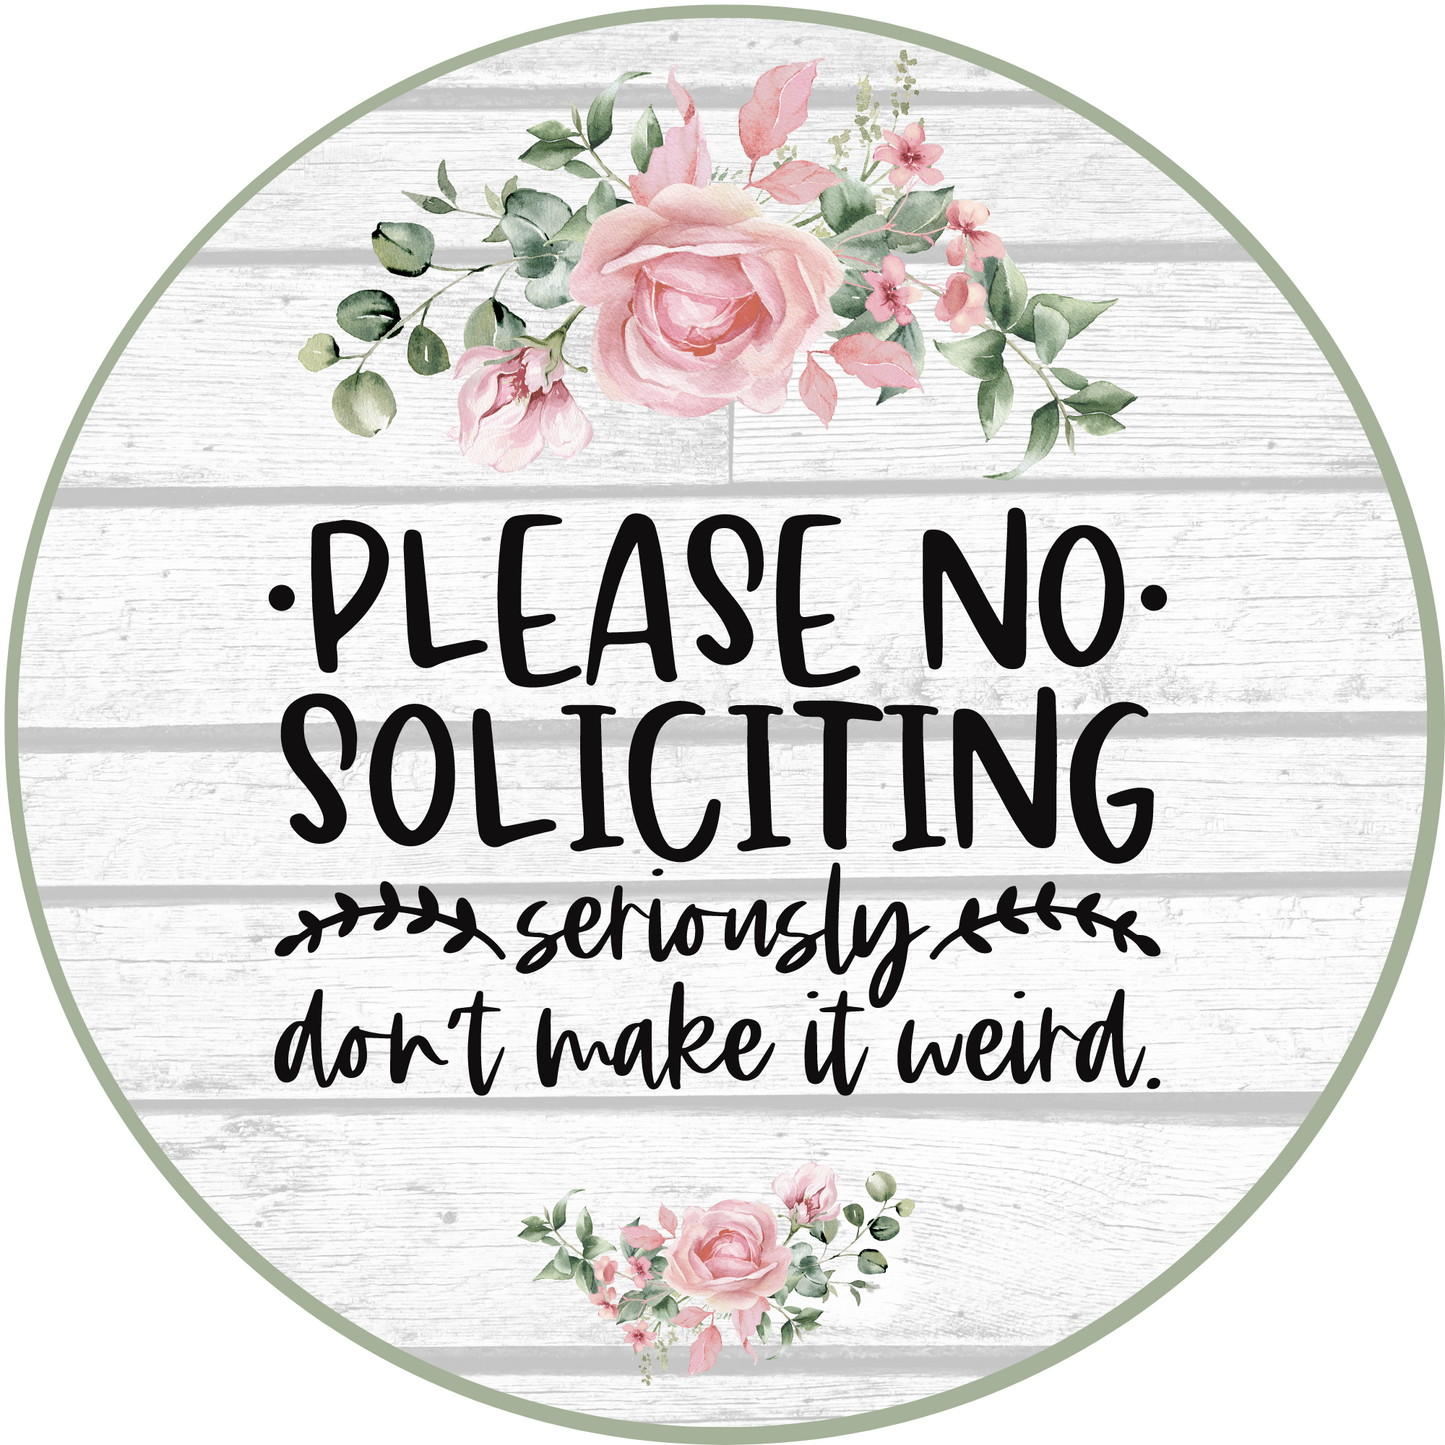 No Soliciting Seriously Don't Make It Weird Round Sign